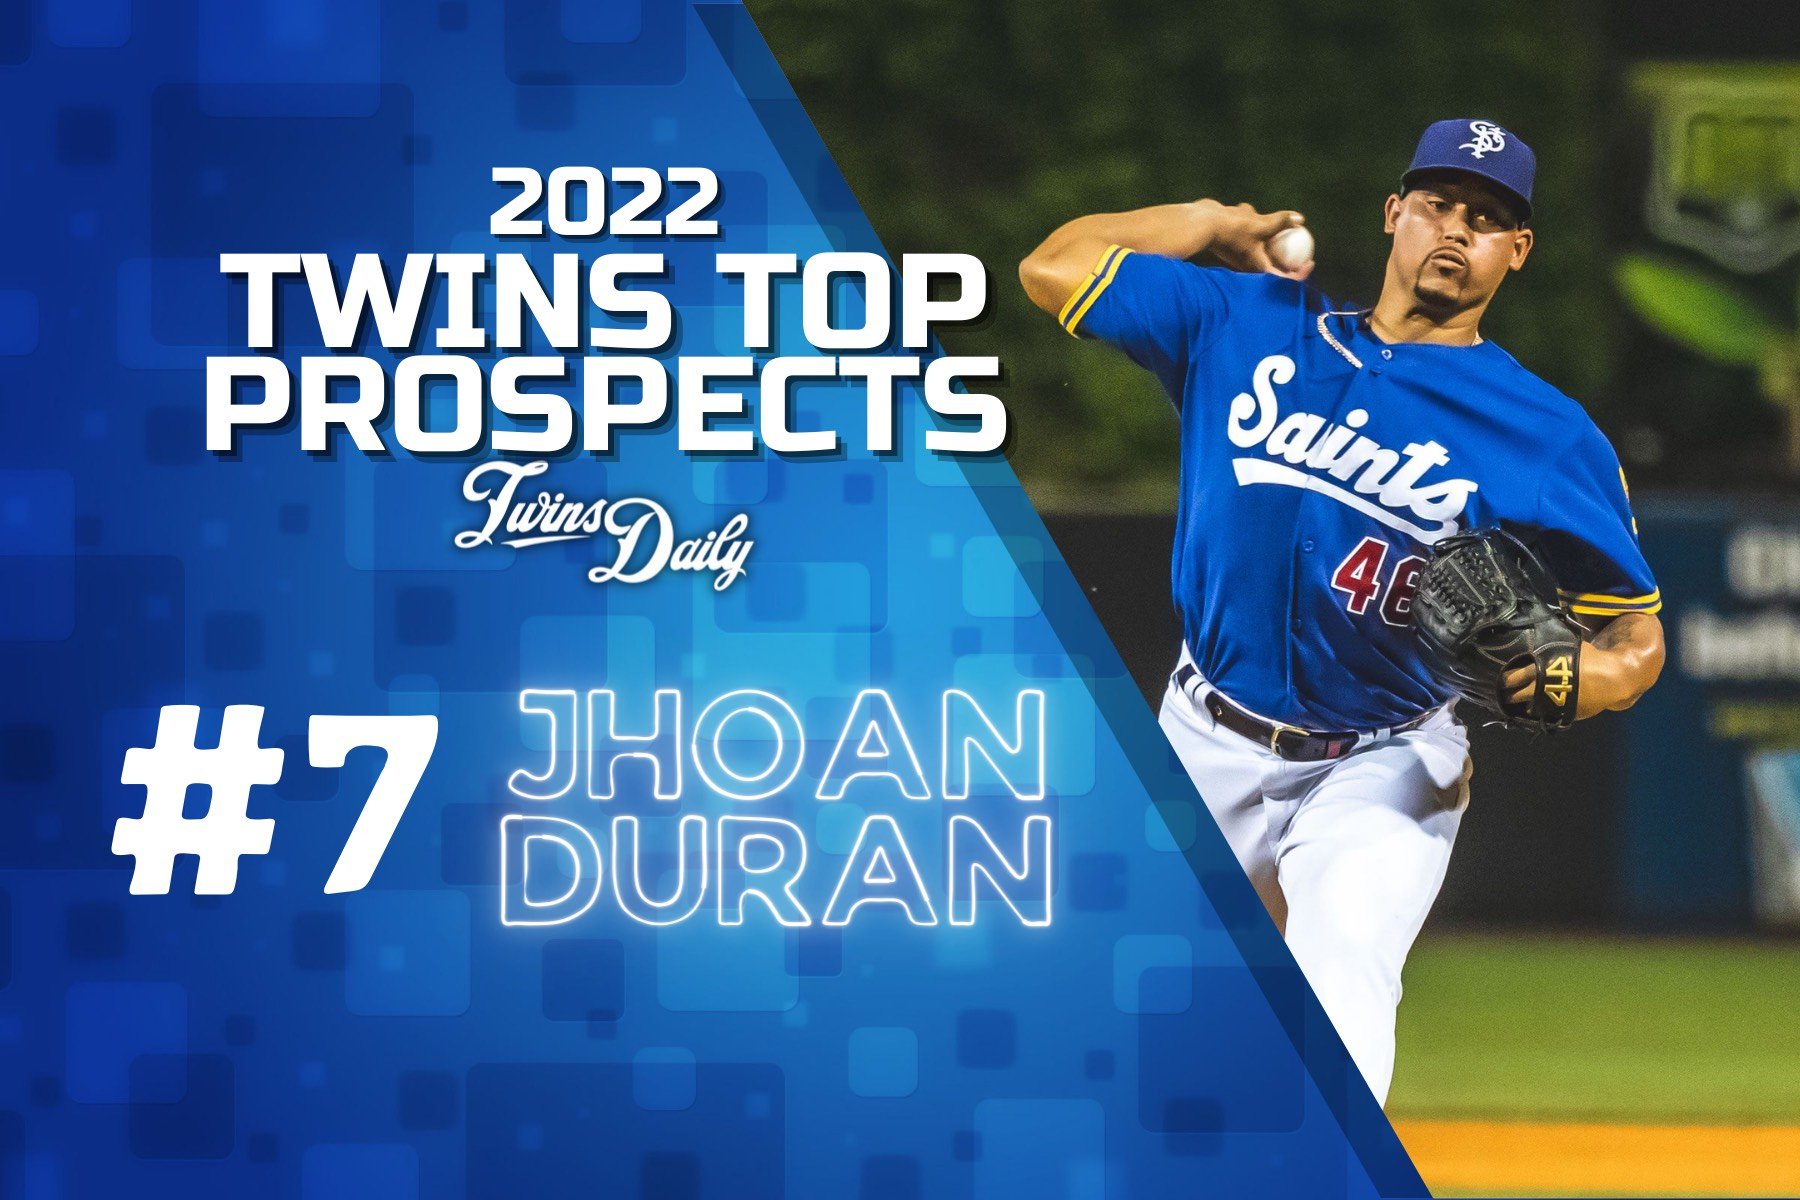 Jhoan Duran lives up to billing in Twins debut with 'closer' stuff